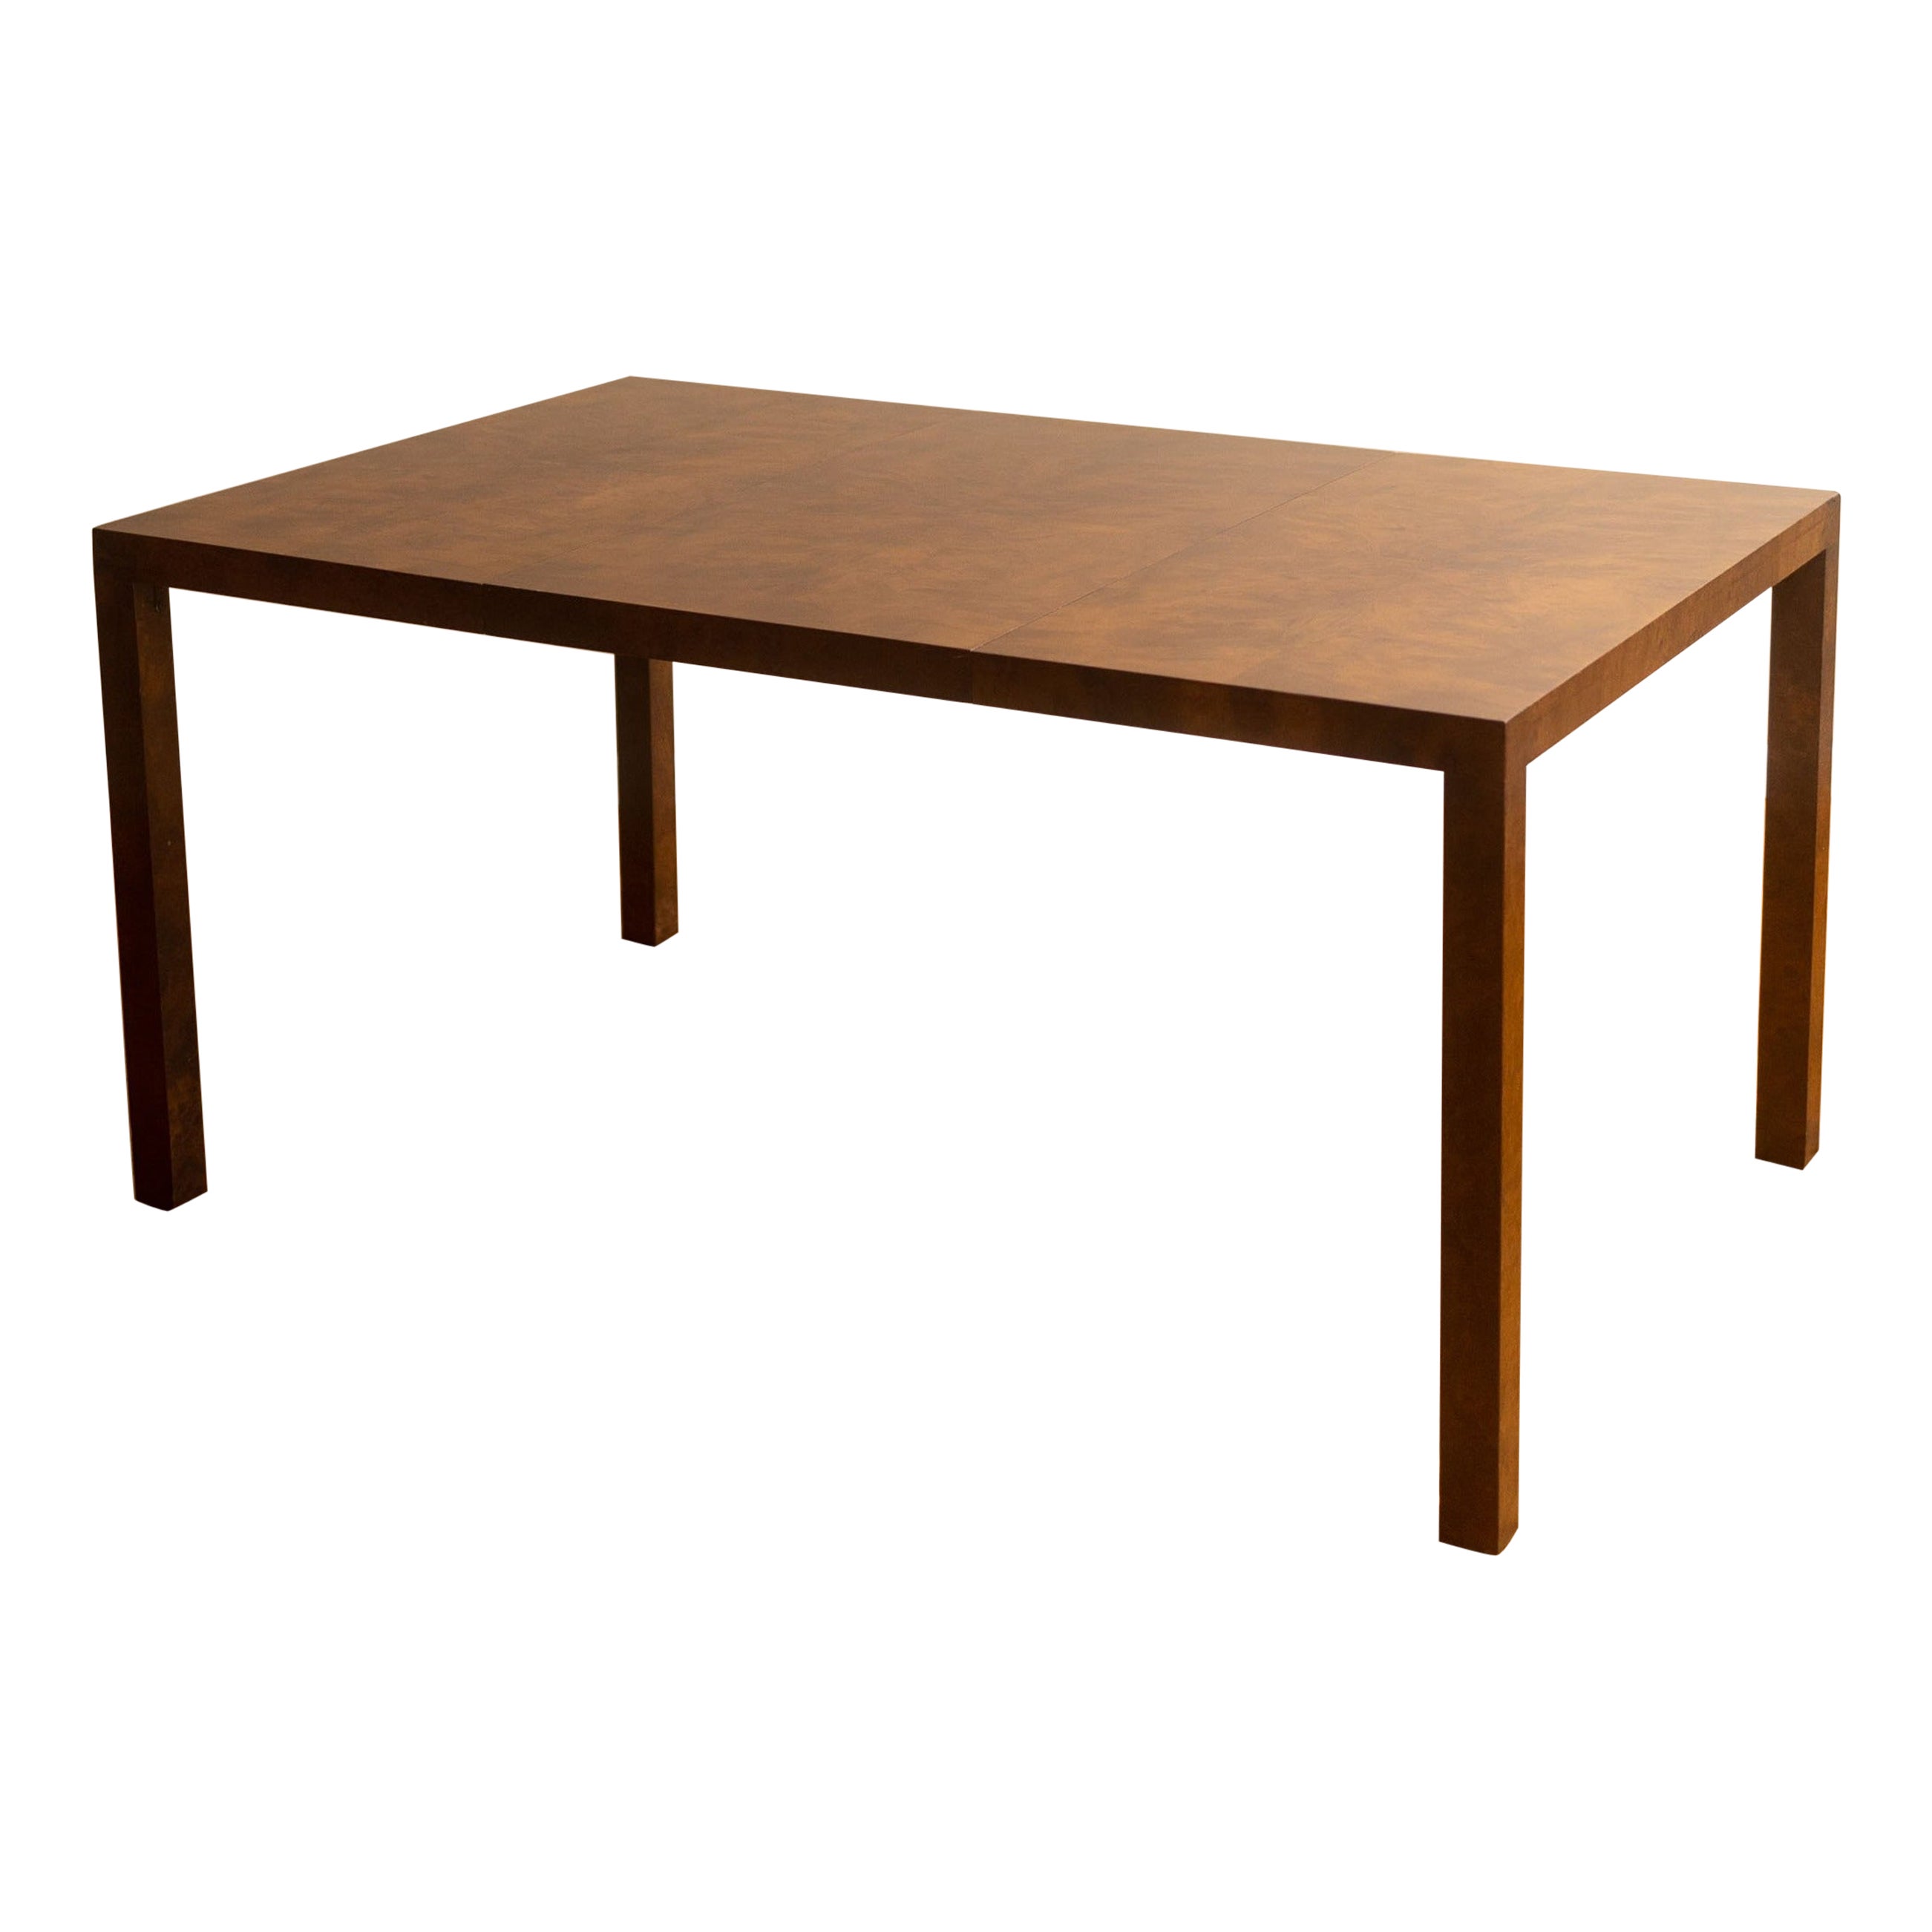 1970s Milo Baughman Burlwood Extension Dining Table for Directional